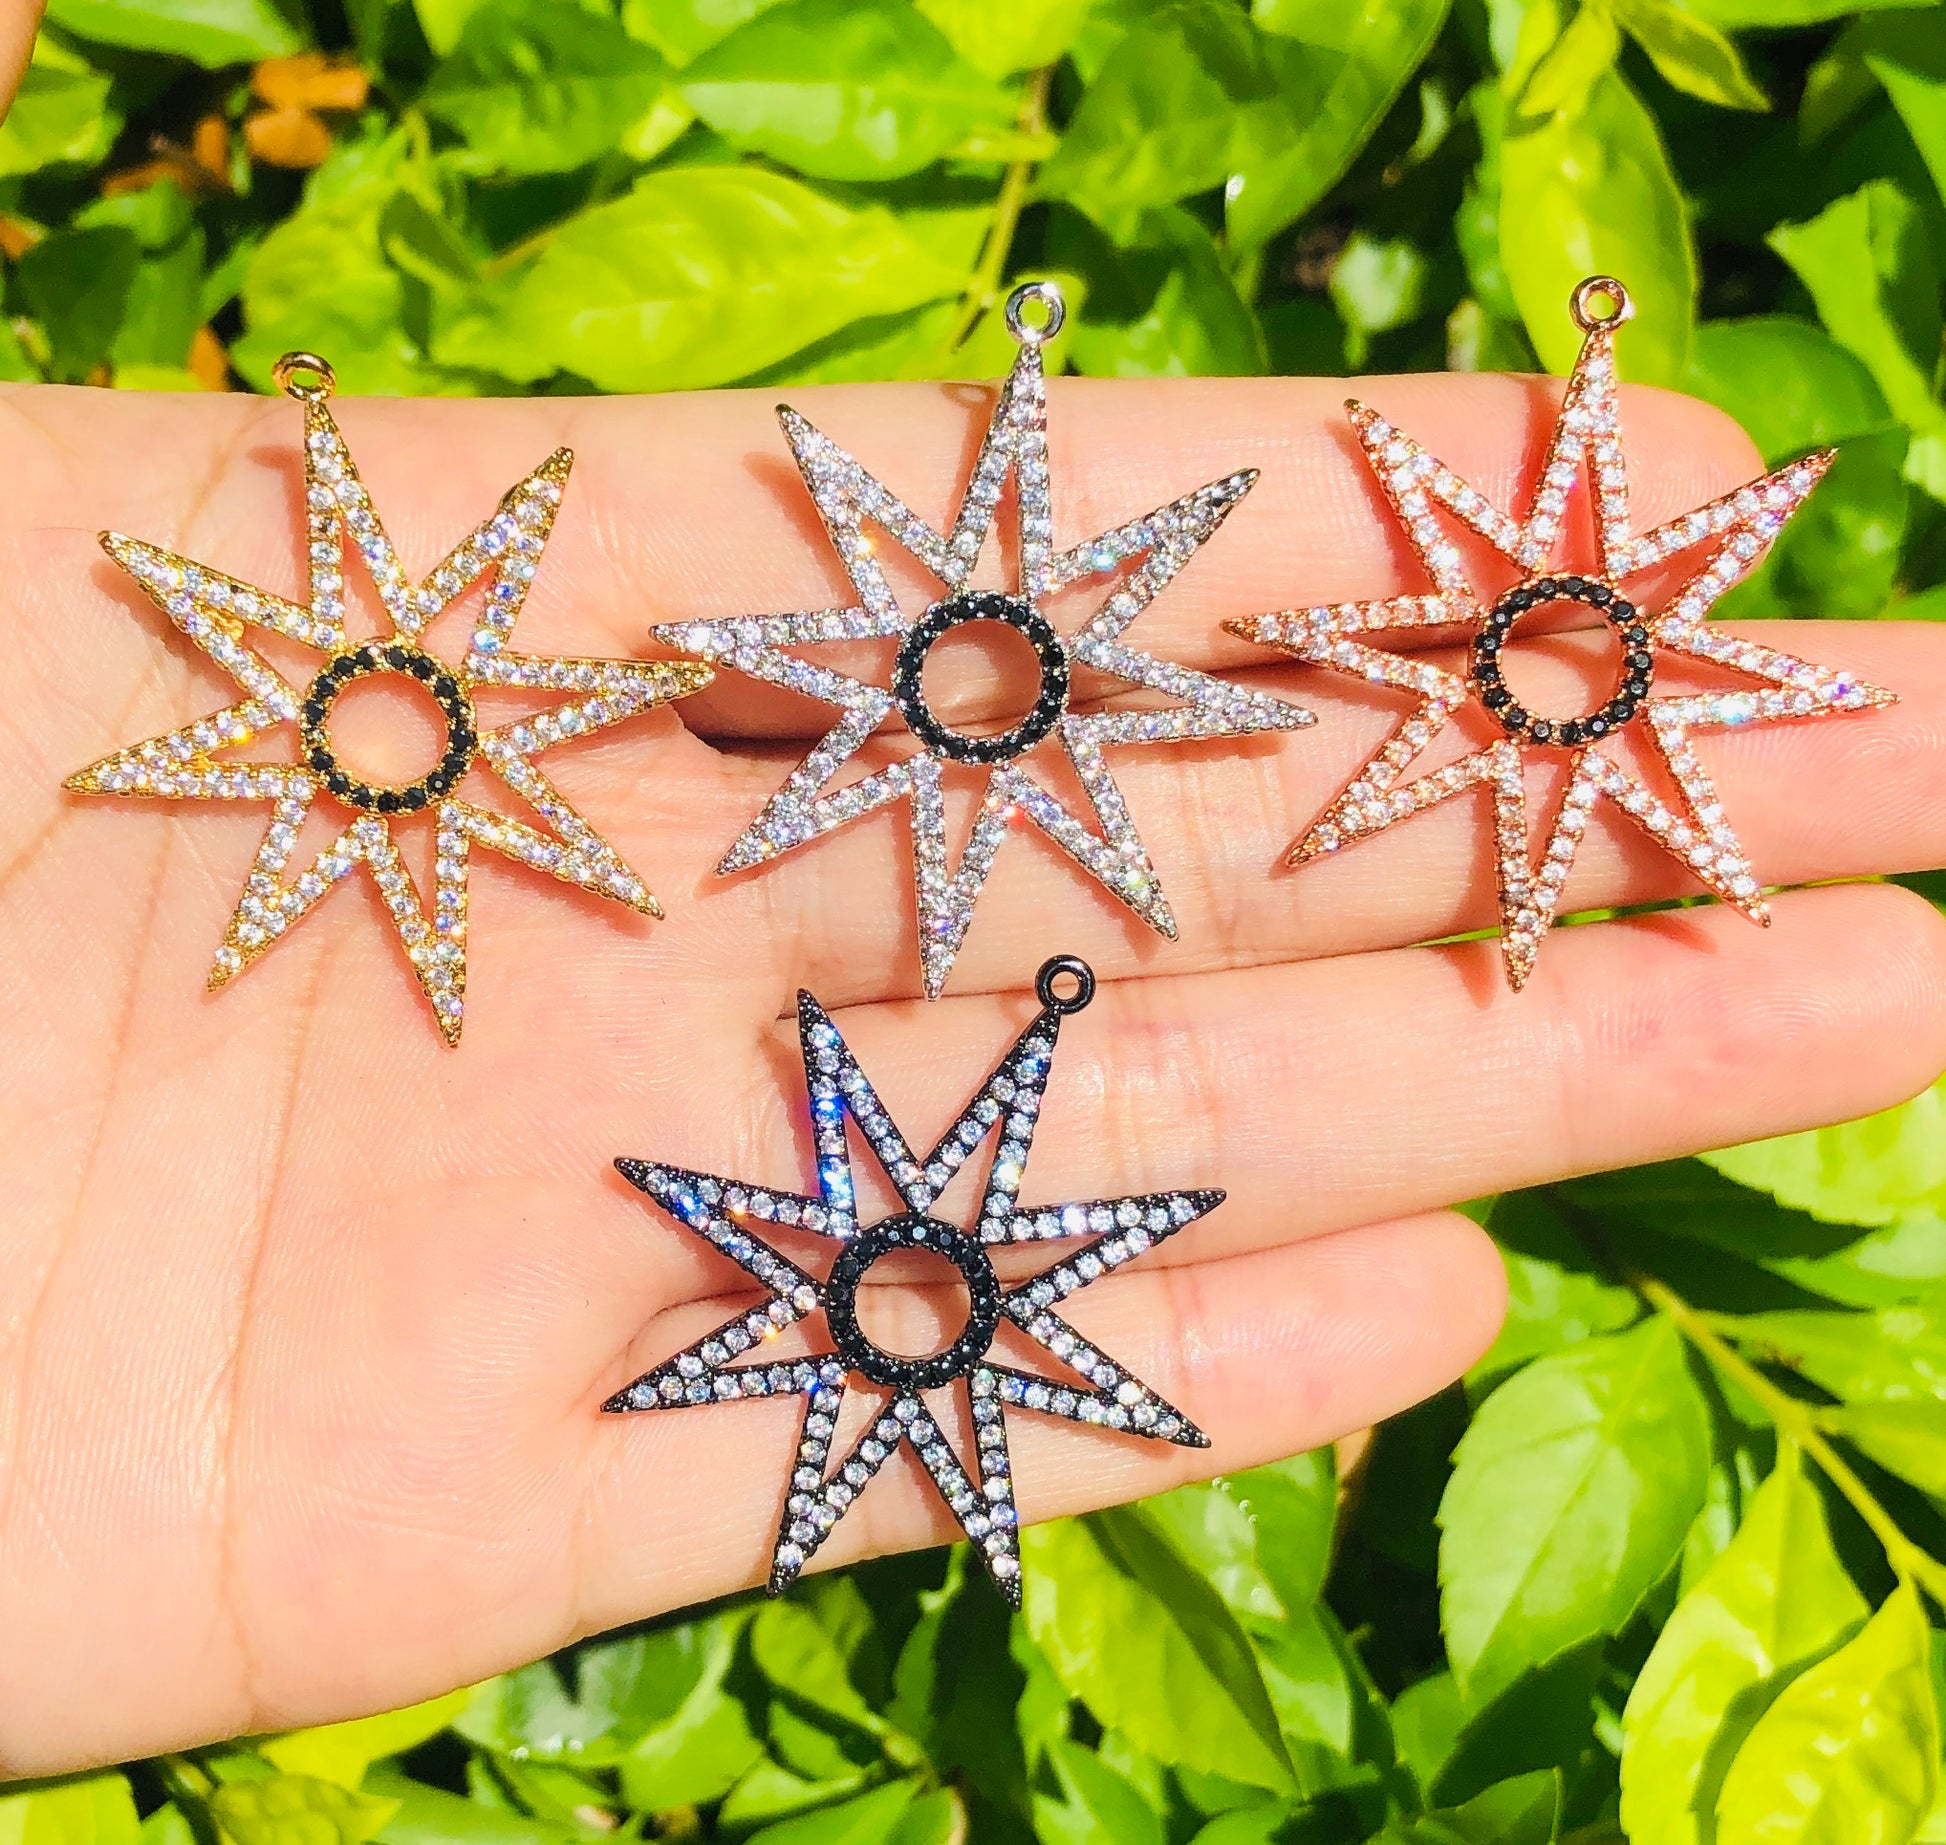 10pcs/lot 35*37mm CZ Paved Star Charms Mix Color CZ Paved Charms Large Sizes Sun Moon Stars Charms Beads Beyond